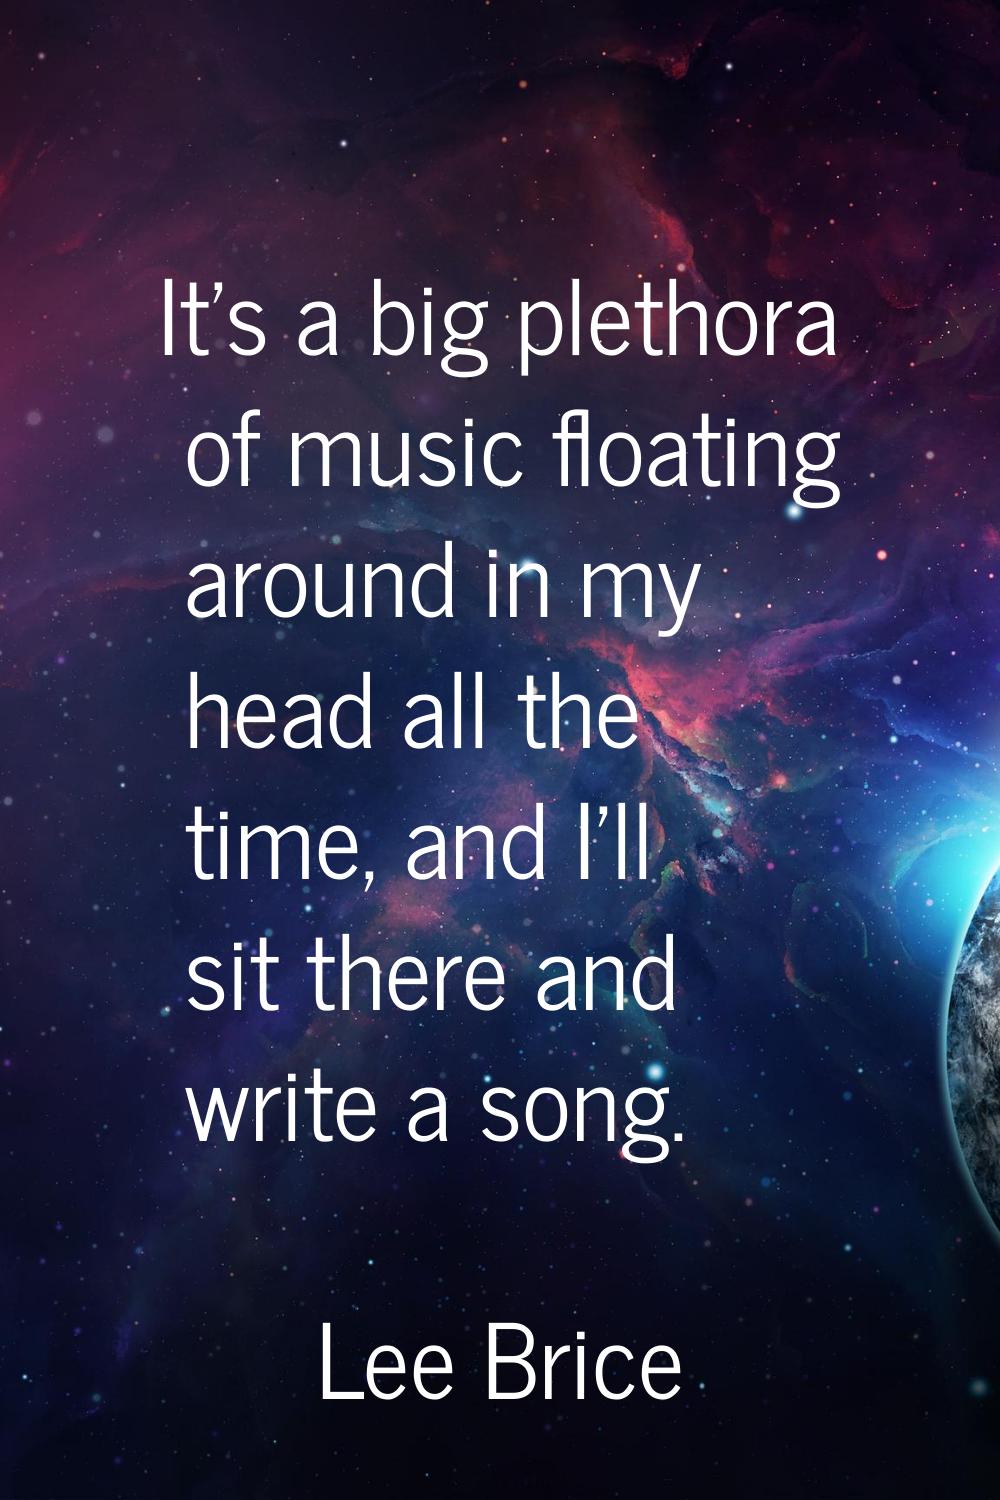 It's a big plethora of music floating around in my head all the time, and I'll sit there and write 